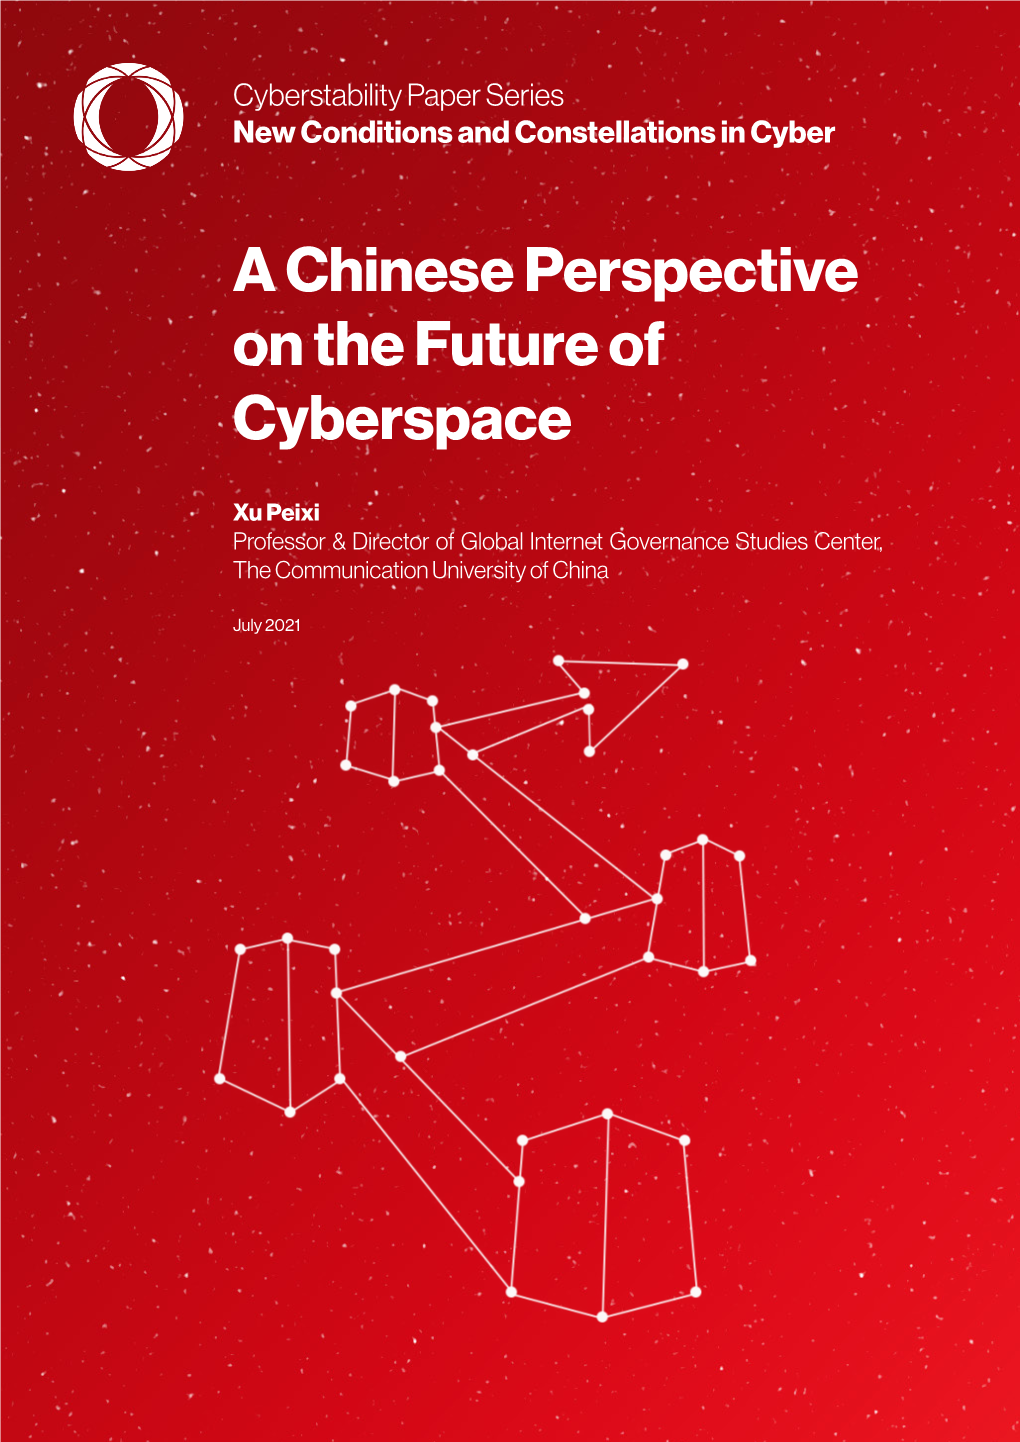 A Chinese Perspective on the Future of Cyberspace